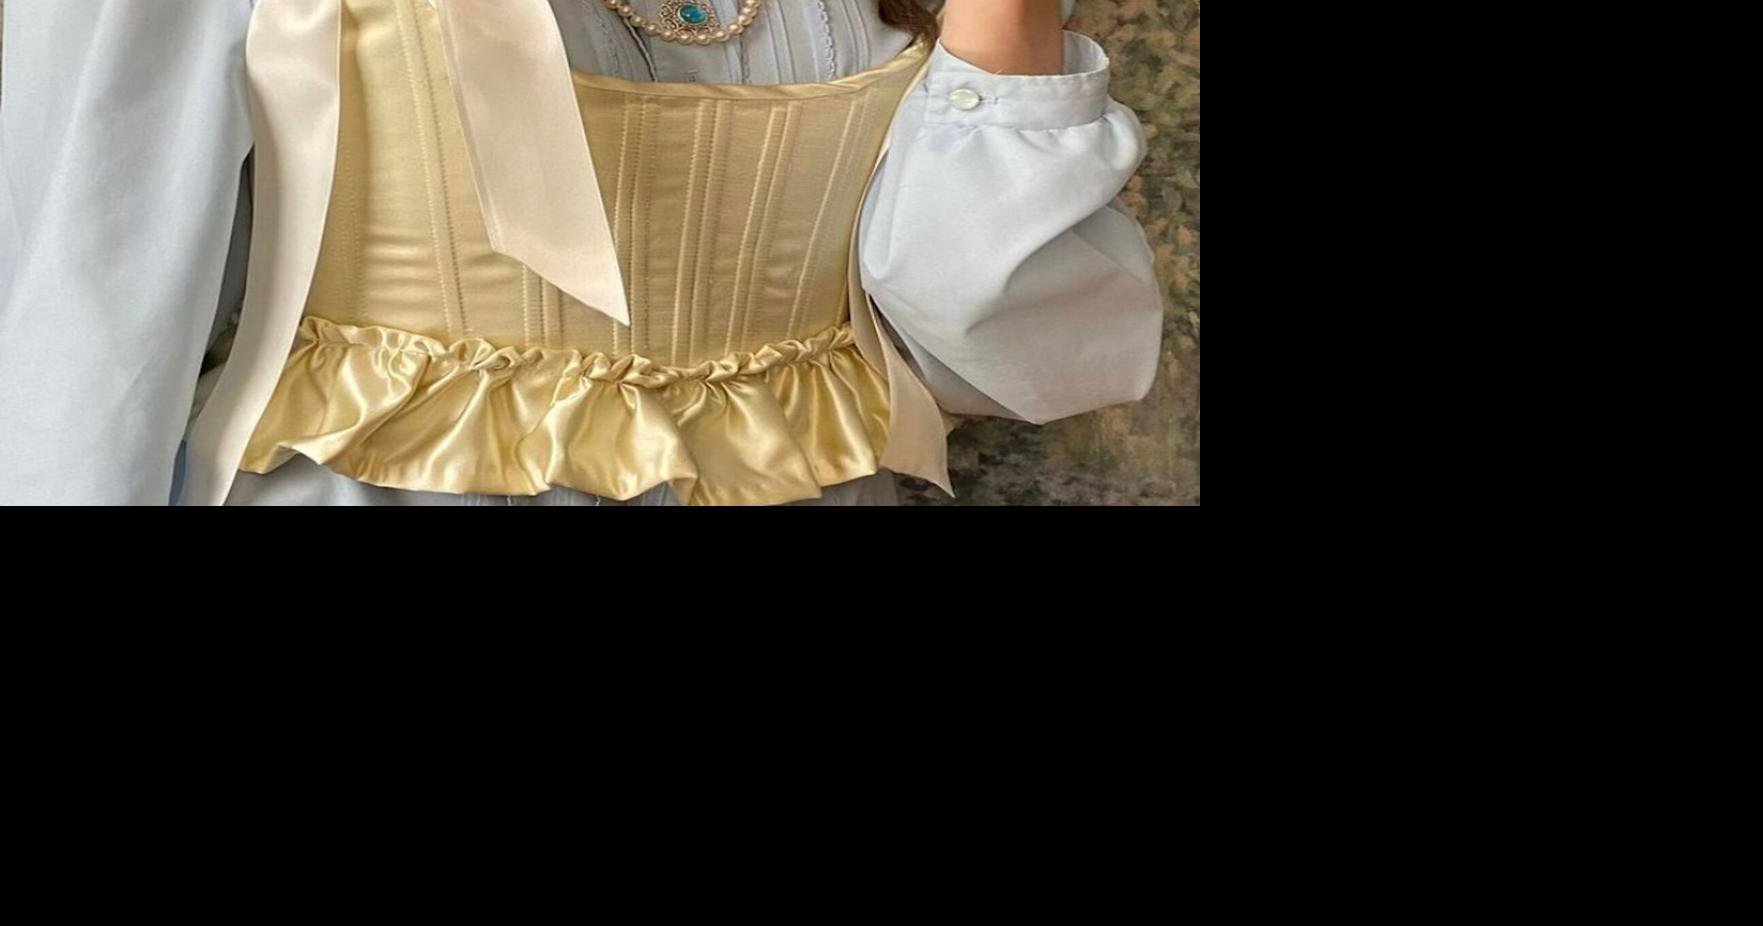 Katherine Sewing on Instagram: We all know corsets are just . . .  historical, outdated symbols of female subjegation and unhealthy beauty  standards, right? Actually, no. I am a historical corset maker